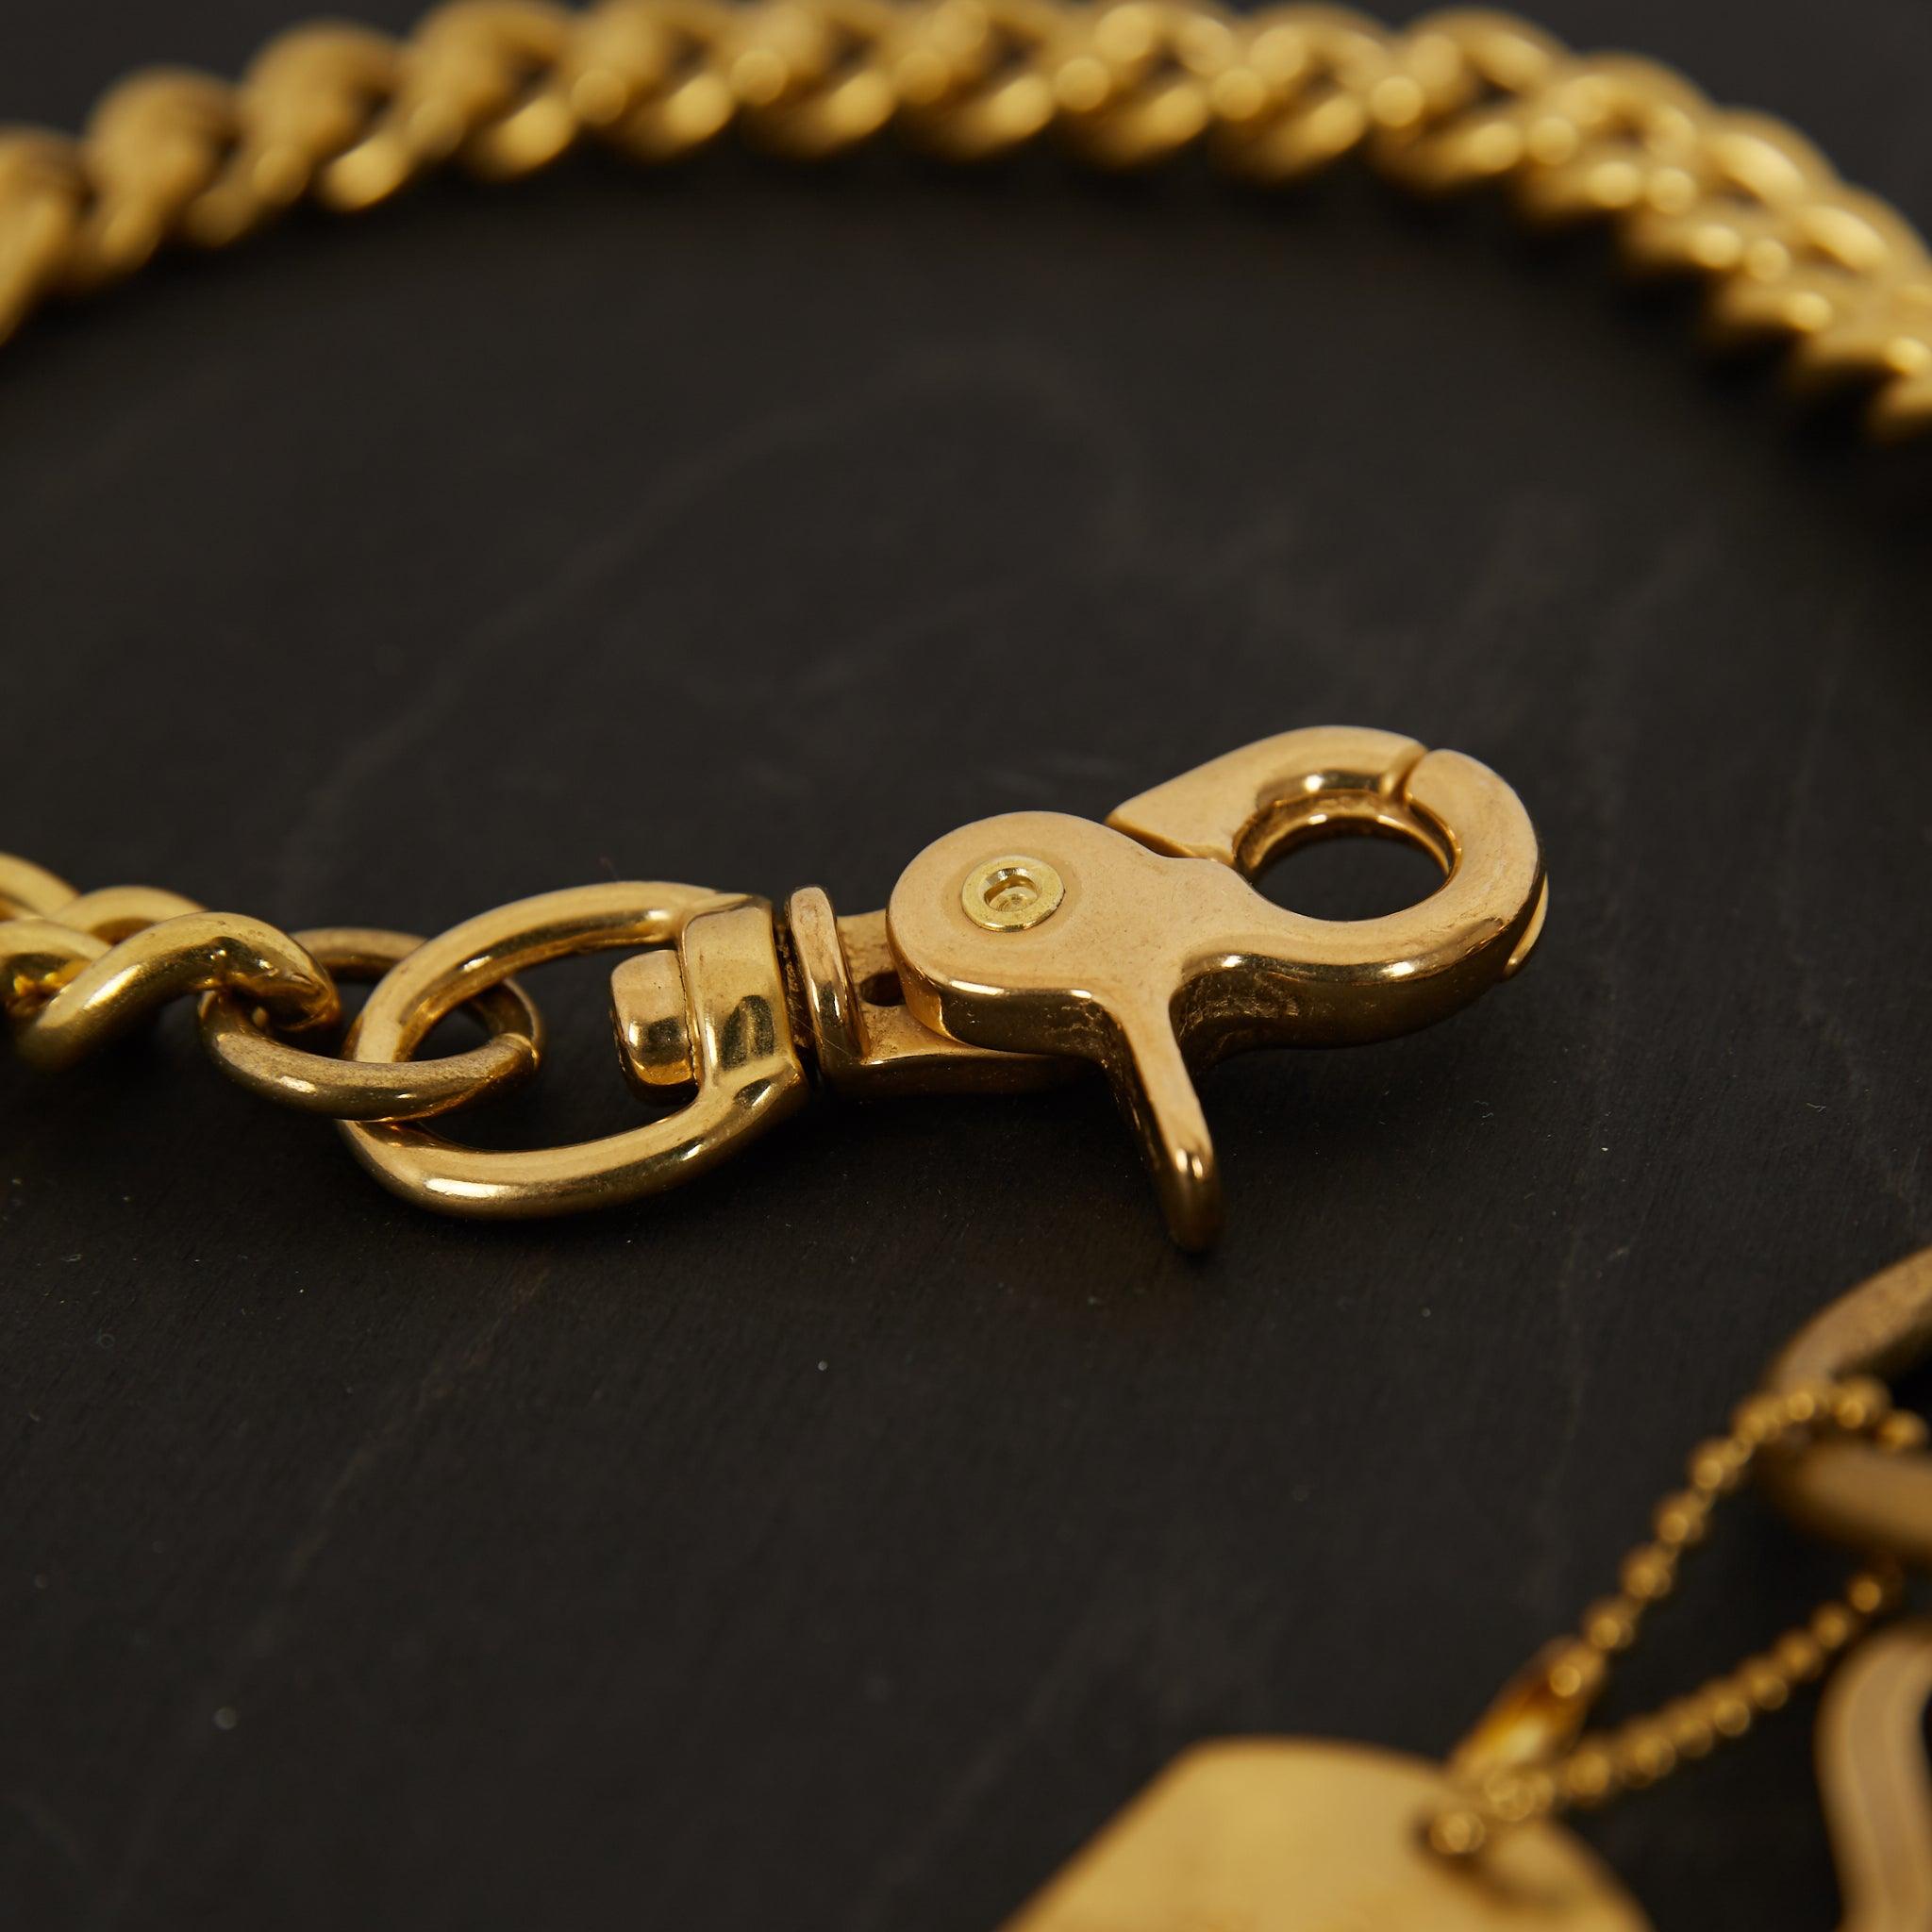 Image showing the Brass-W6 - Wallet Chain with Hook and Rings Brass which is a WALLETS AND CHAINS described by the following info Accessories, Iron Heart, Released, WALLETS AND CHAINS and sold on the IRON HEART GERMANY online store